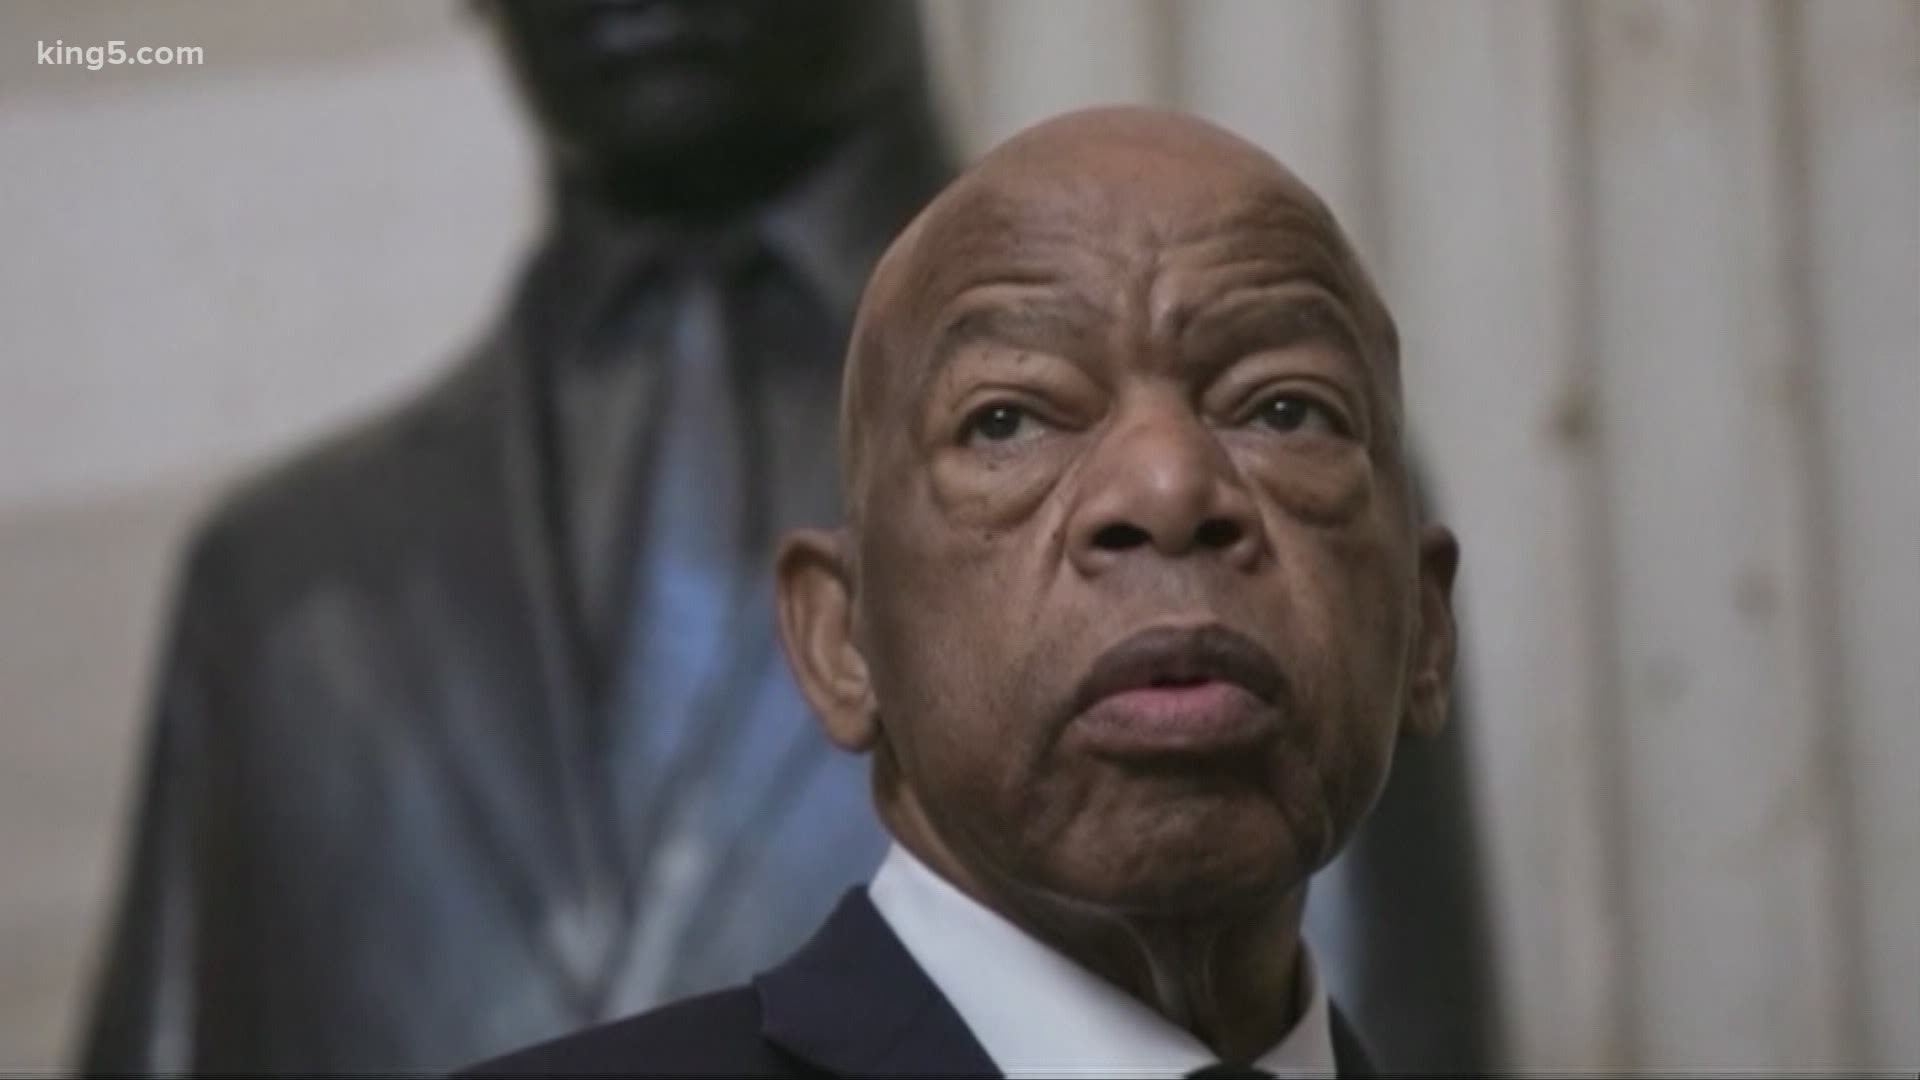 John Lewis' early roots in activism are what made him a beloved figure for those who continue the fight for racial justice.